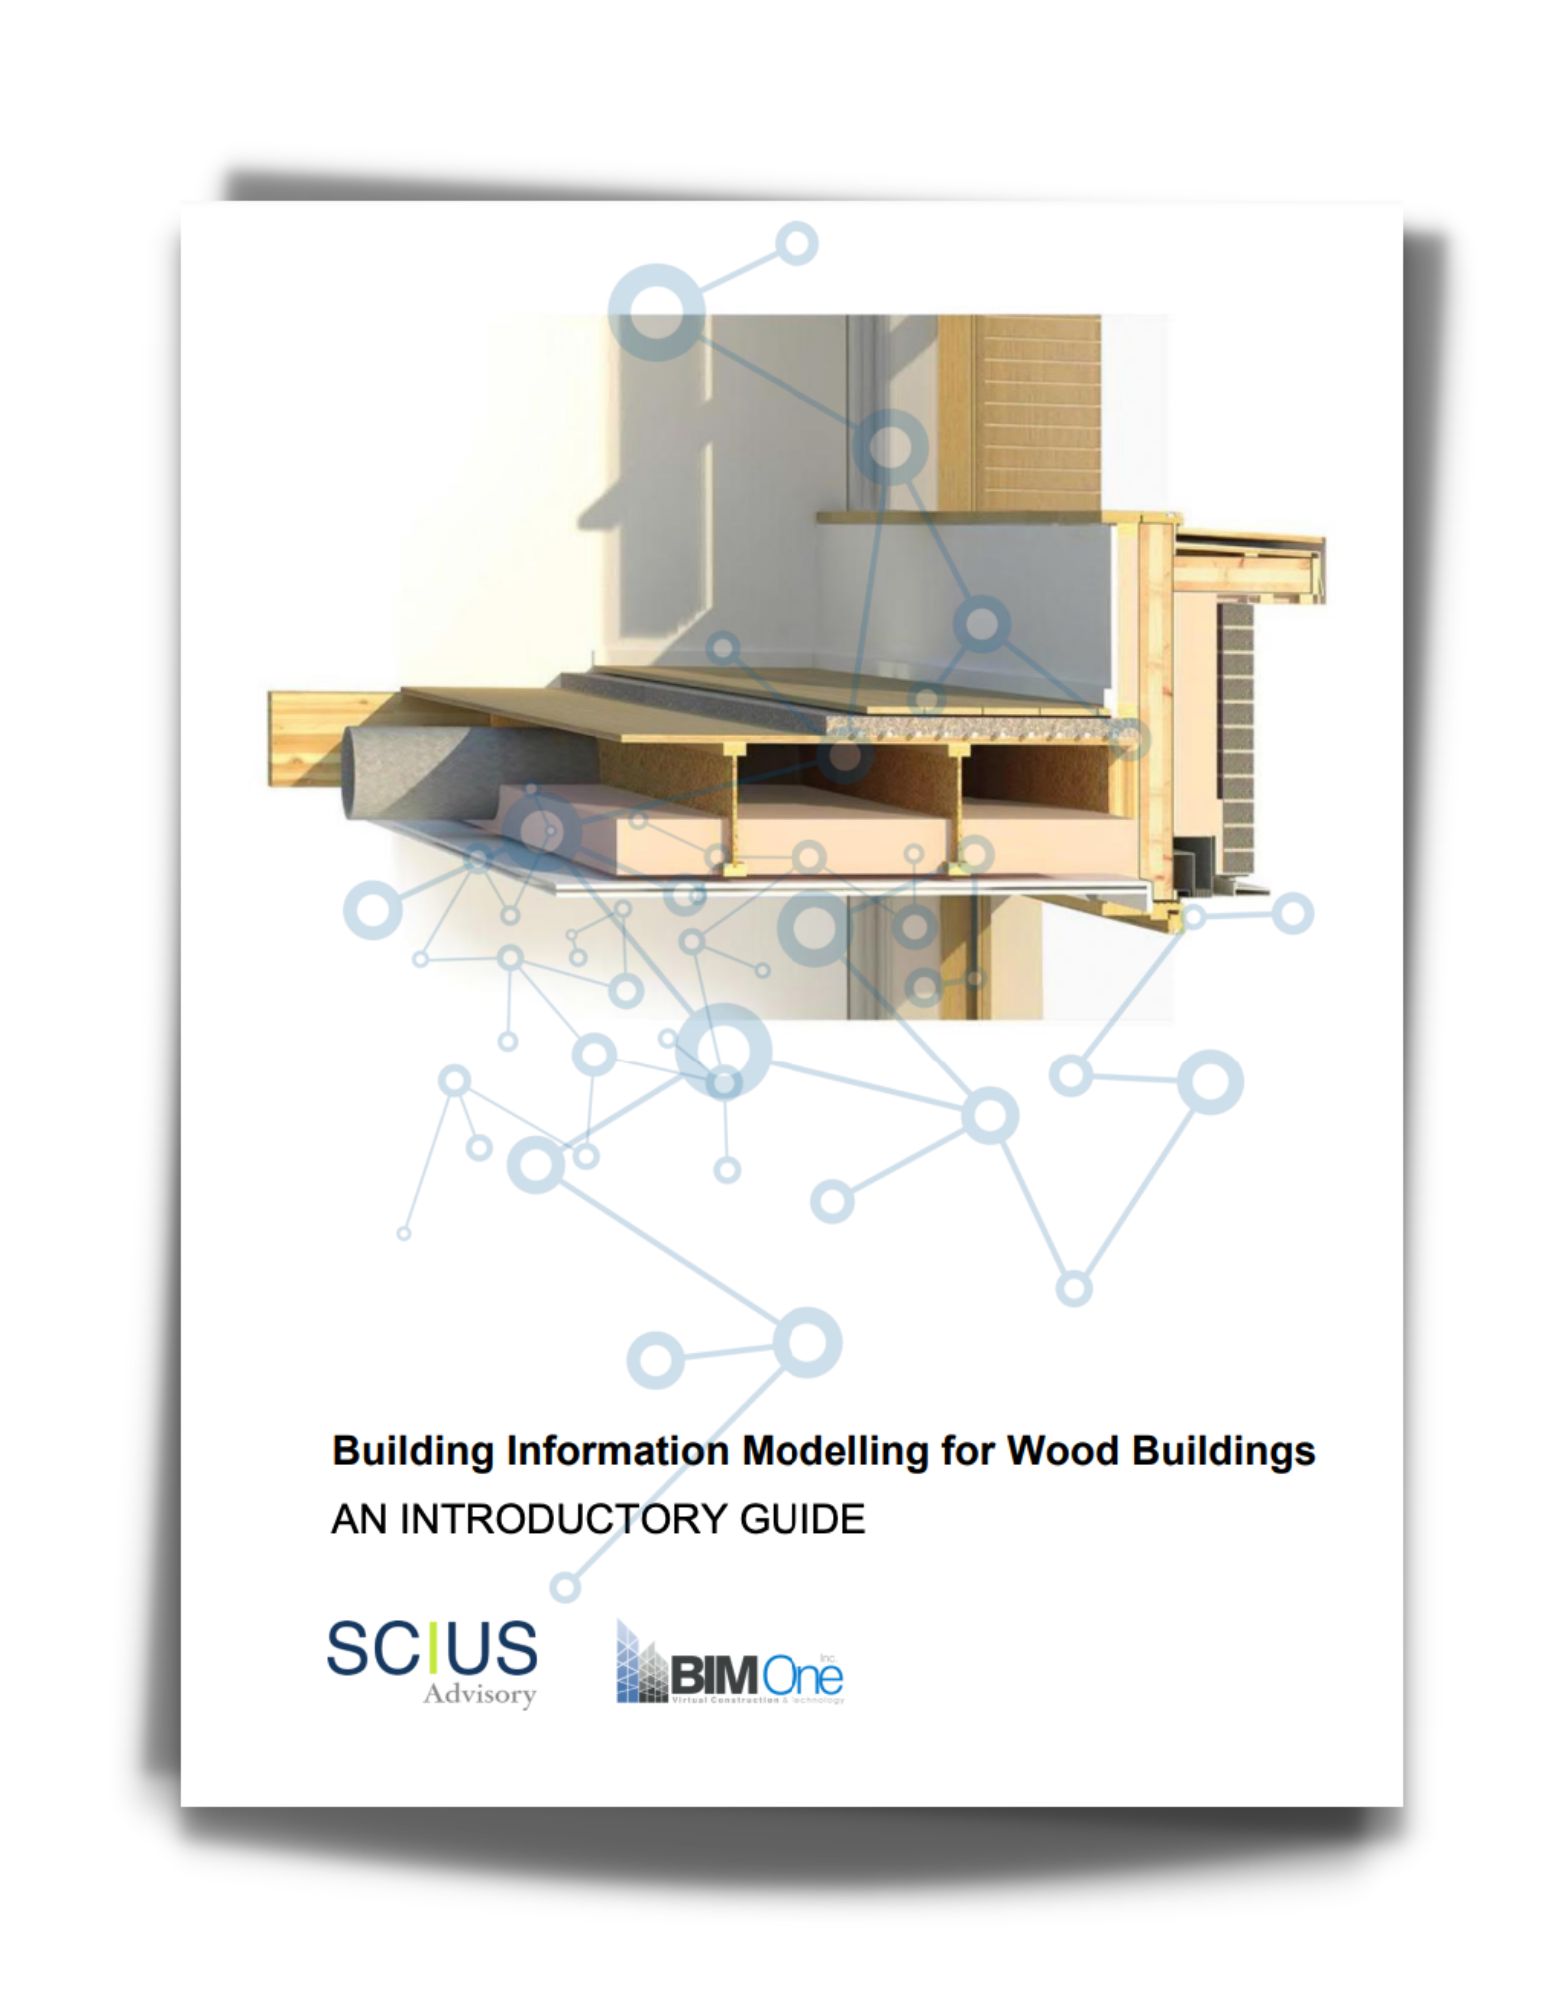 Building Information Modelling (BIM) for Wood Buildings: An Introductory Guide